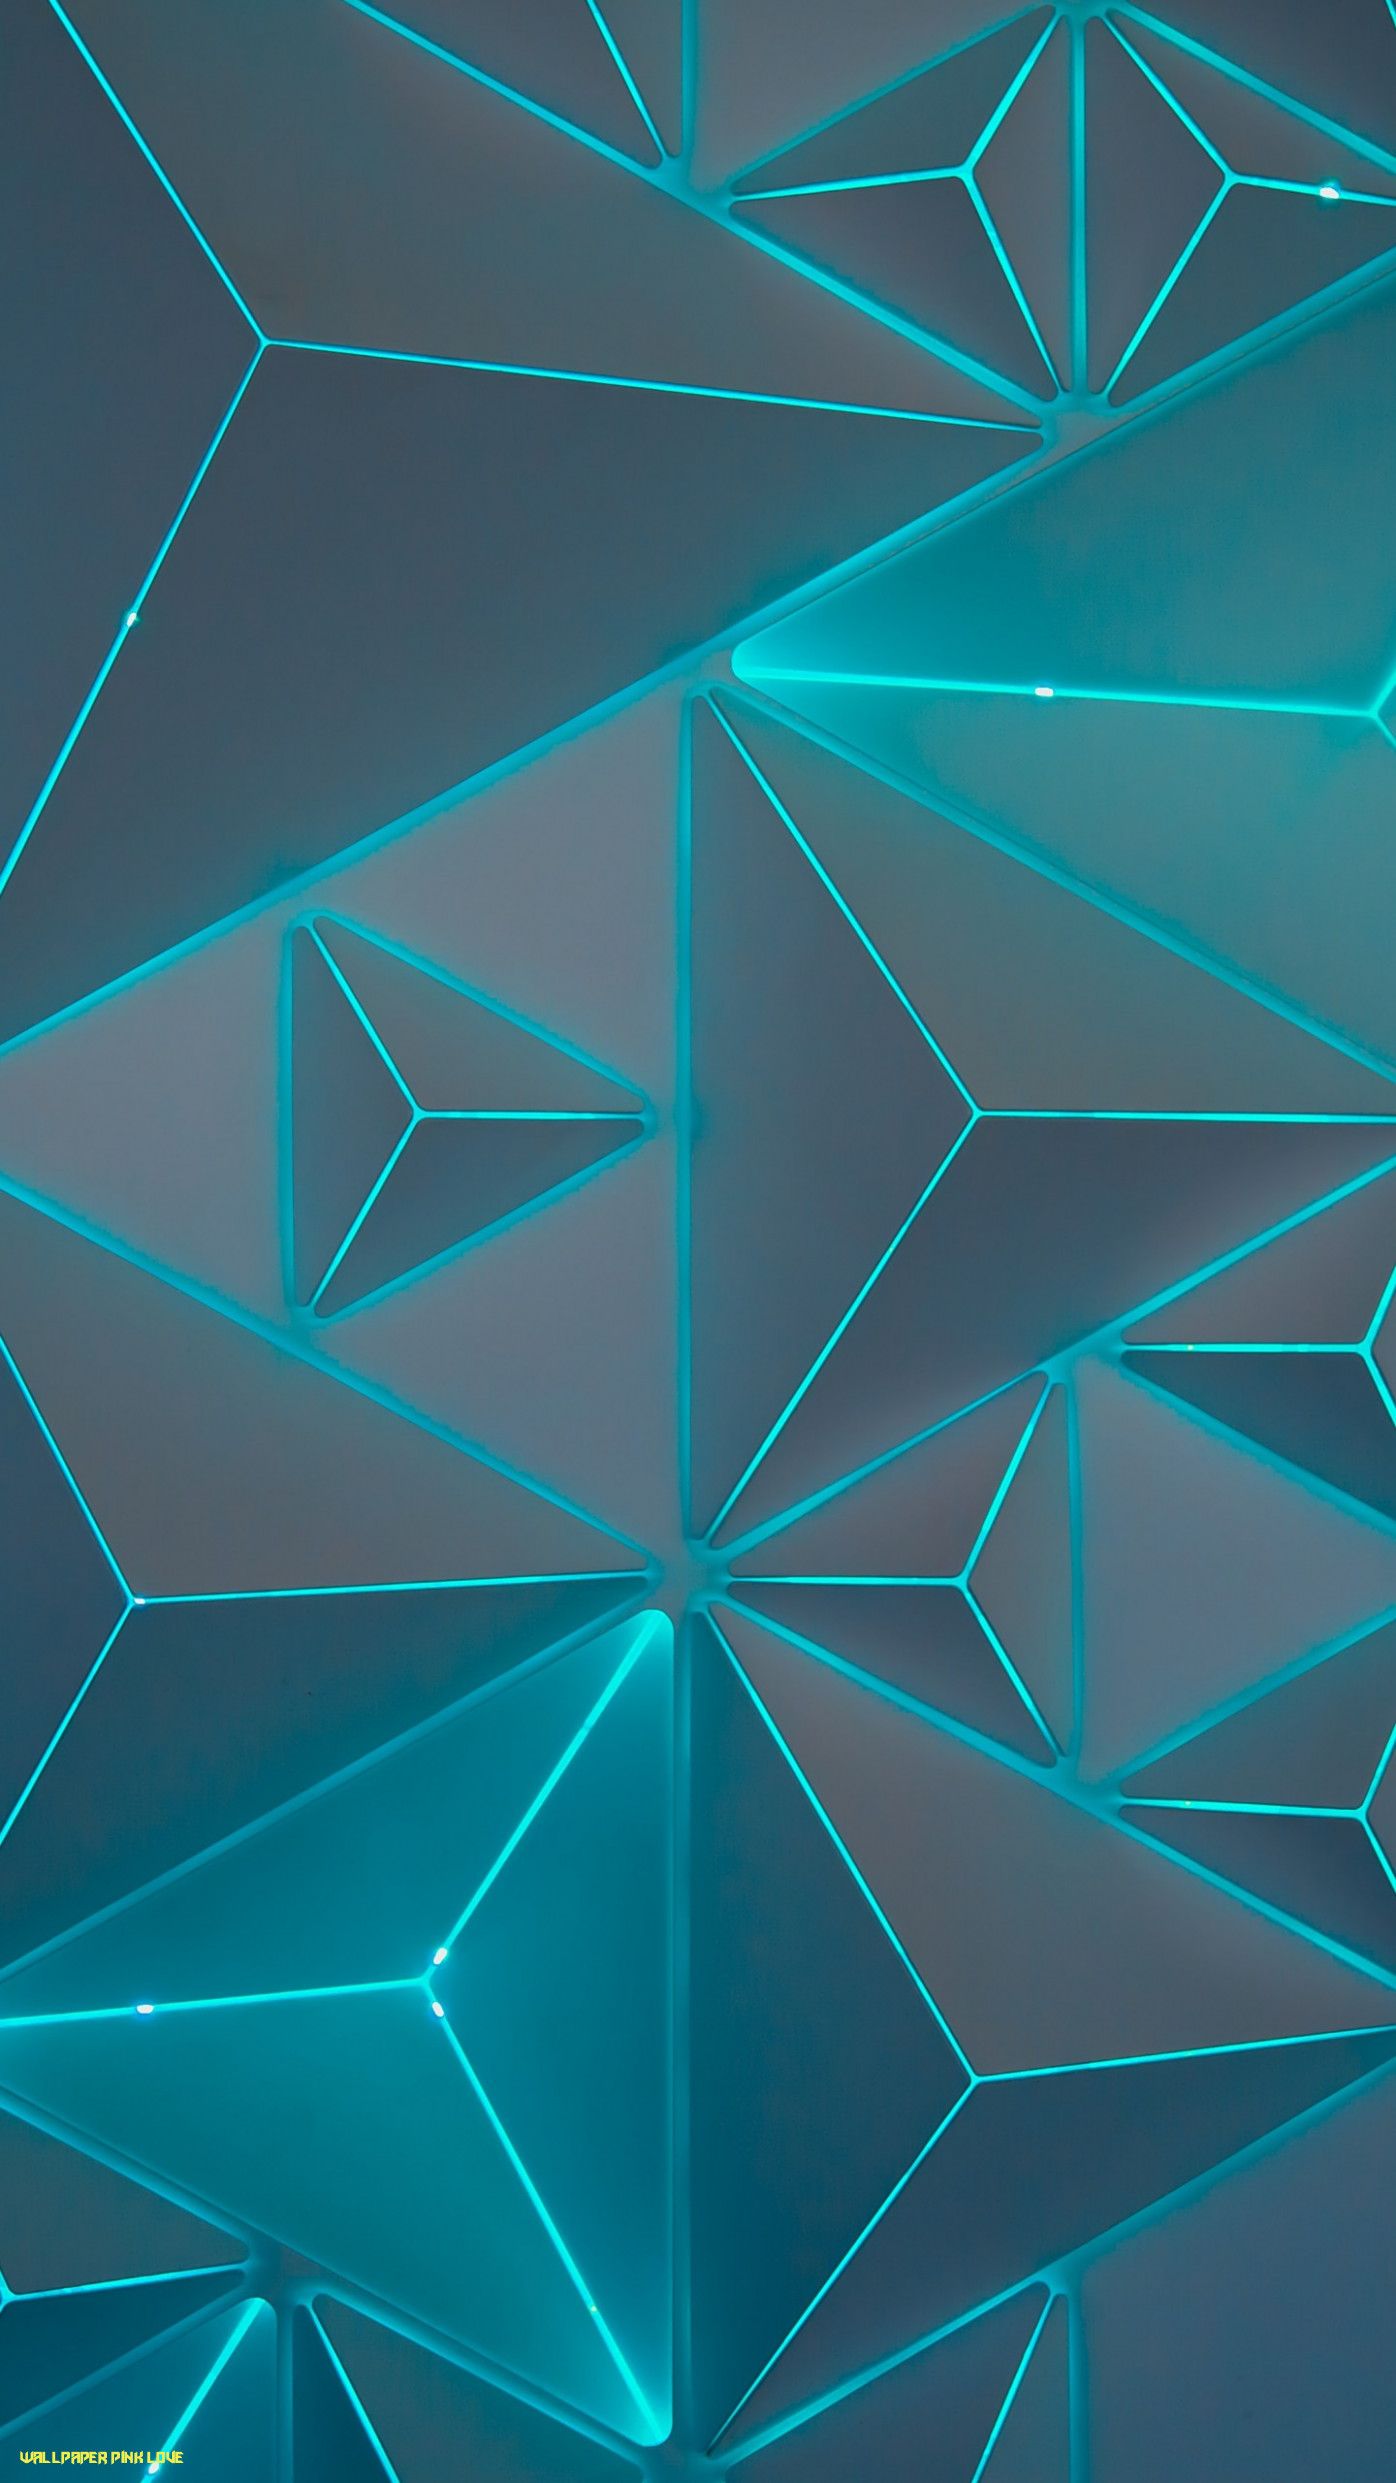 Wallpaper Triangles, Neon, Turquoise, Teal, Geometric